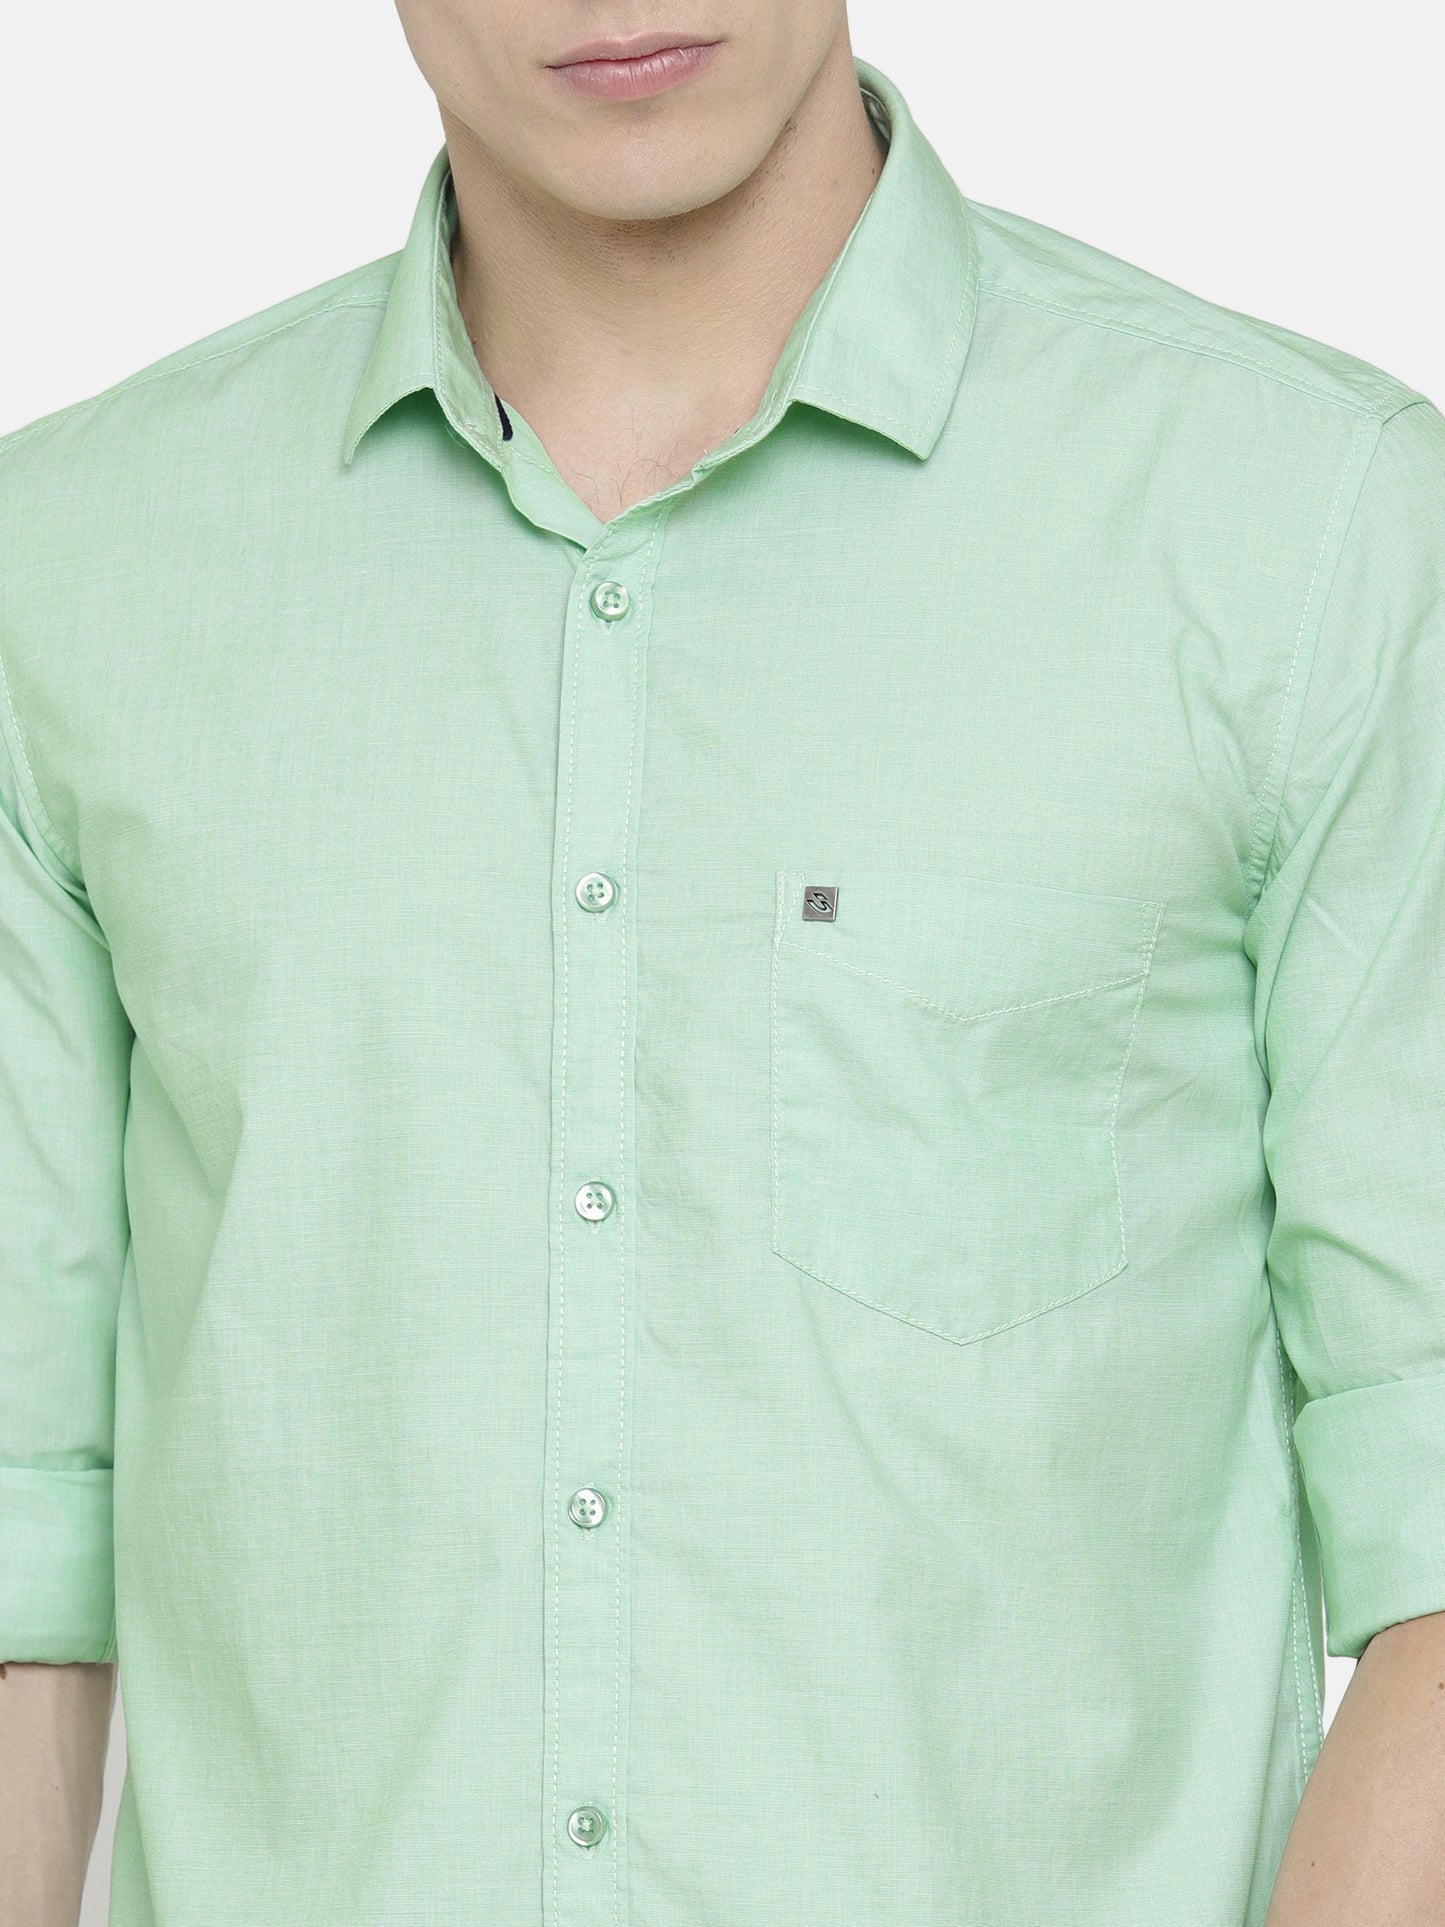 Light Green Solid structured Shirt